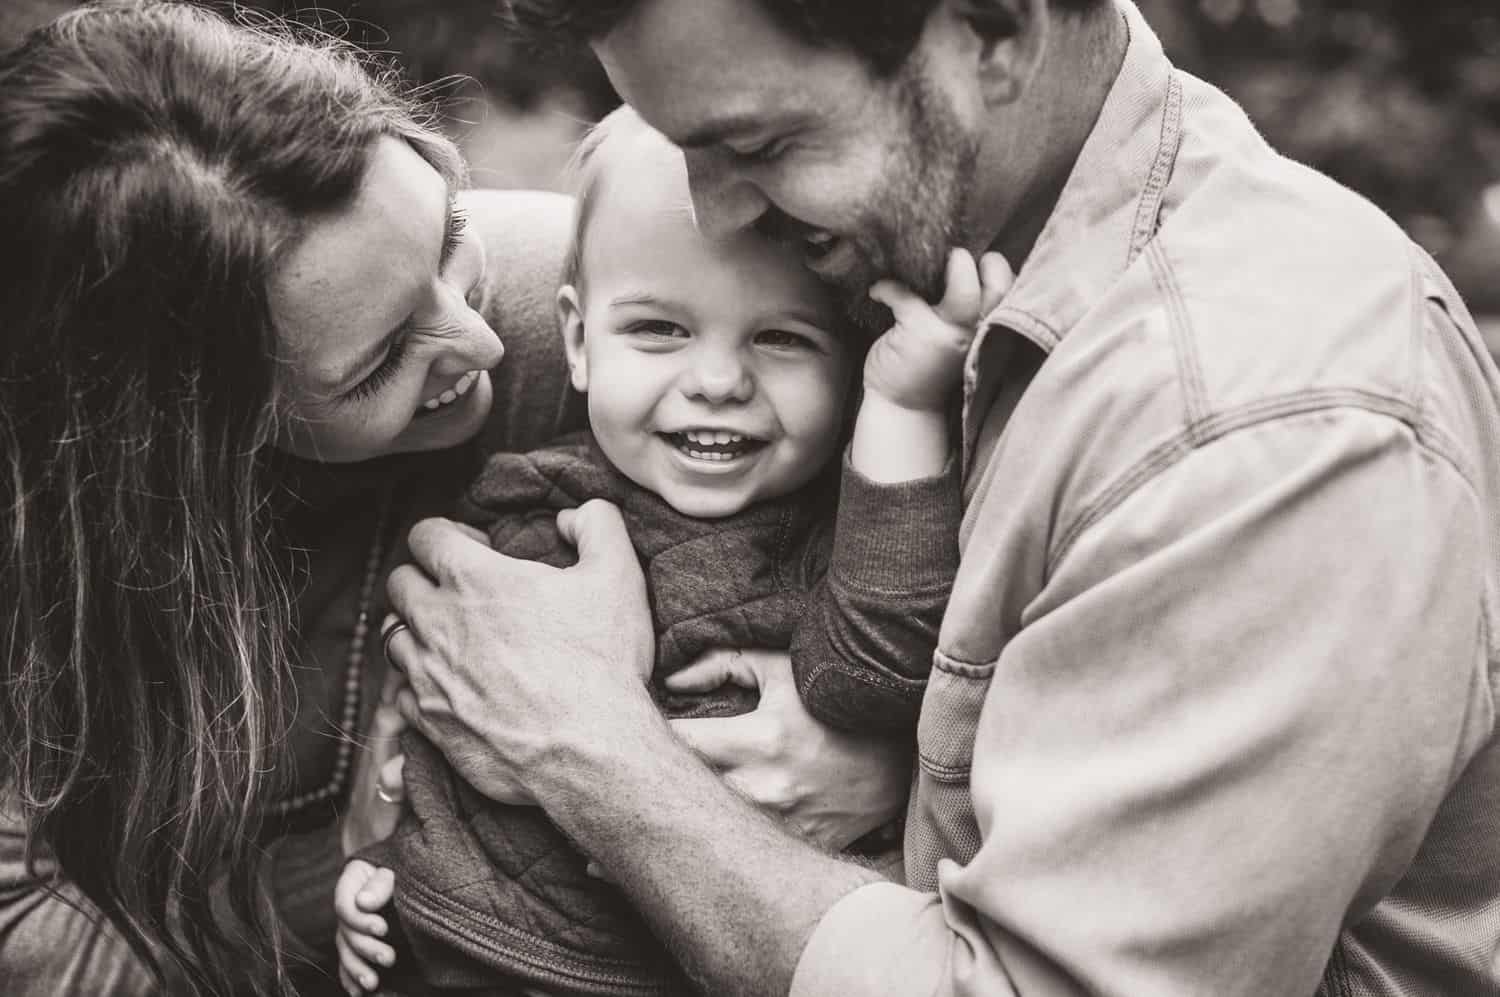 Two parents cuddle close to their toddler in black and white.